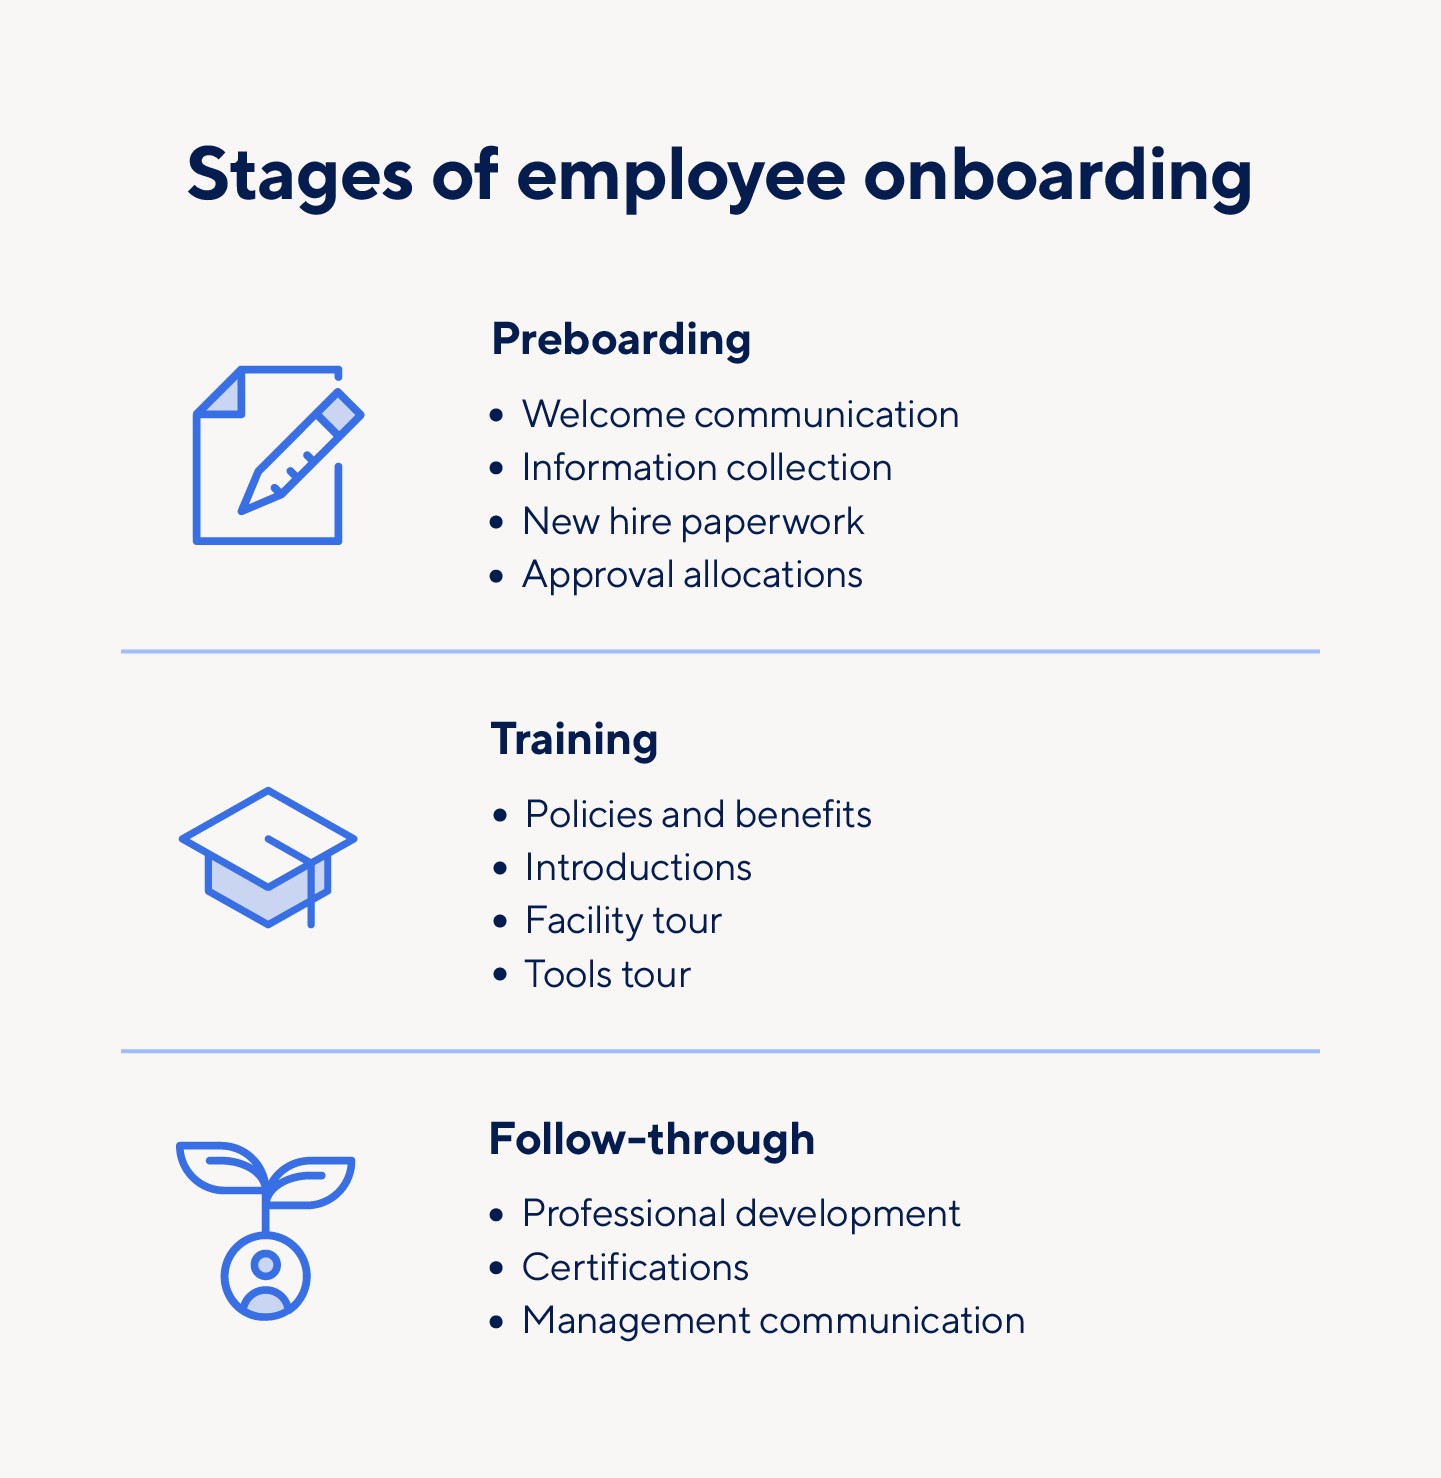 The three stages of onboarding are preboarding, training, and follow-through.